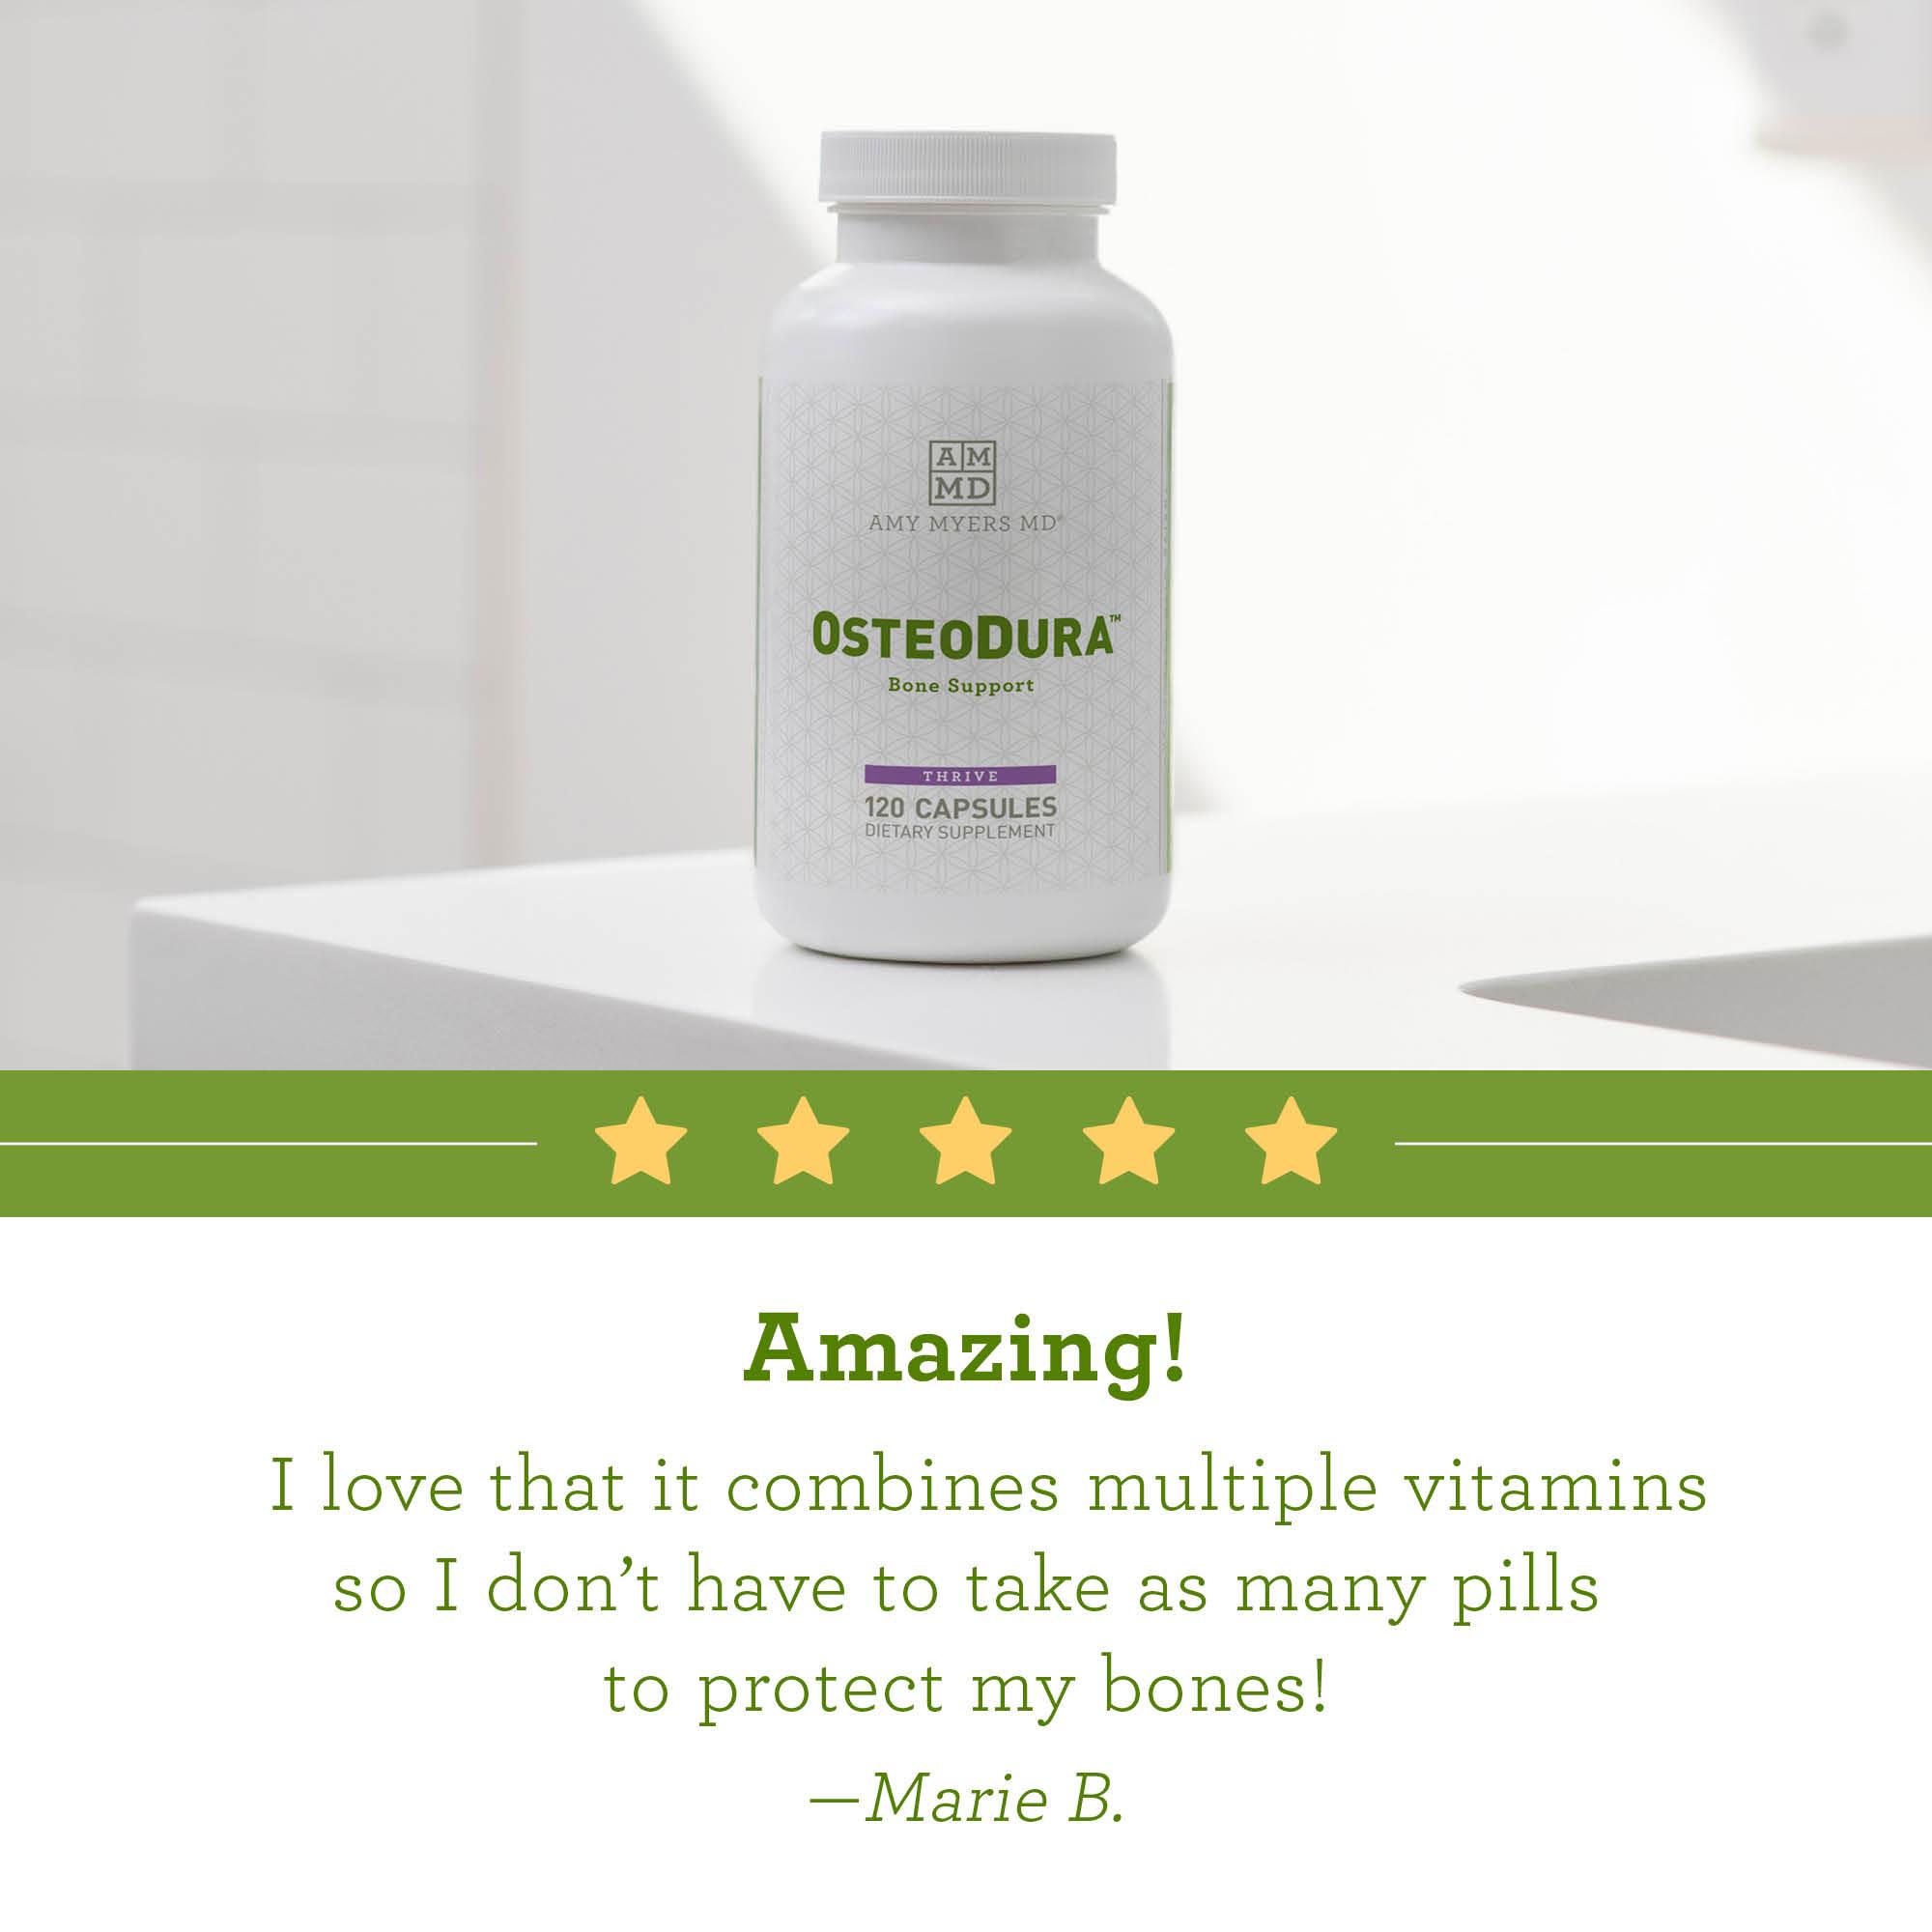 A bottle of OsteoDura™ on a table top with reviews - Reviews Image - Amy Myers MD®